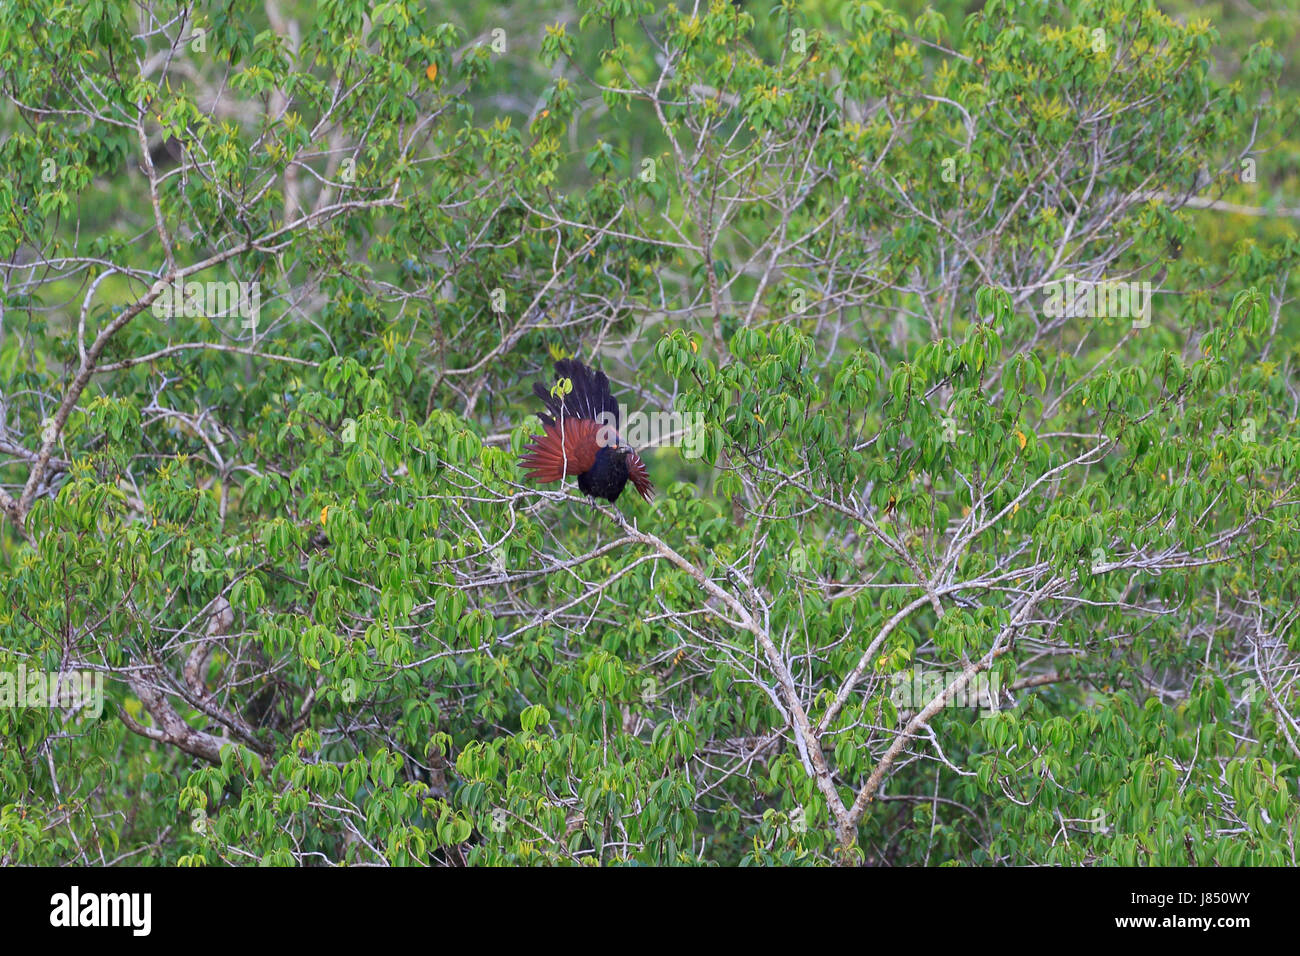 Greater coucal (Centropus sinensis) in the world largest mangrove forest Sundarbans, famous for the Royal Bengal Tiger and UNESCO World Heritage site  Stock Photo